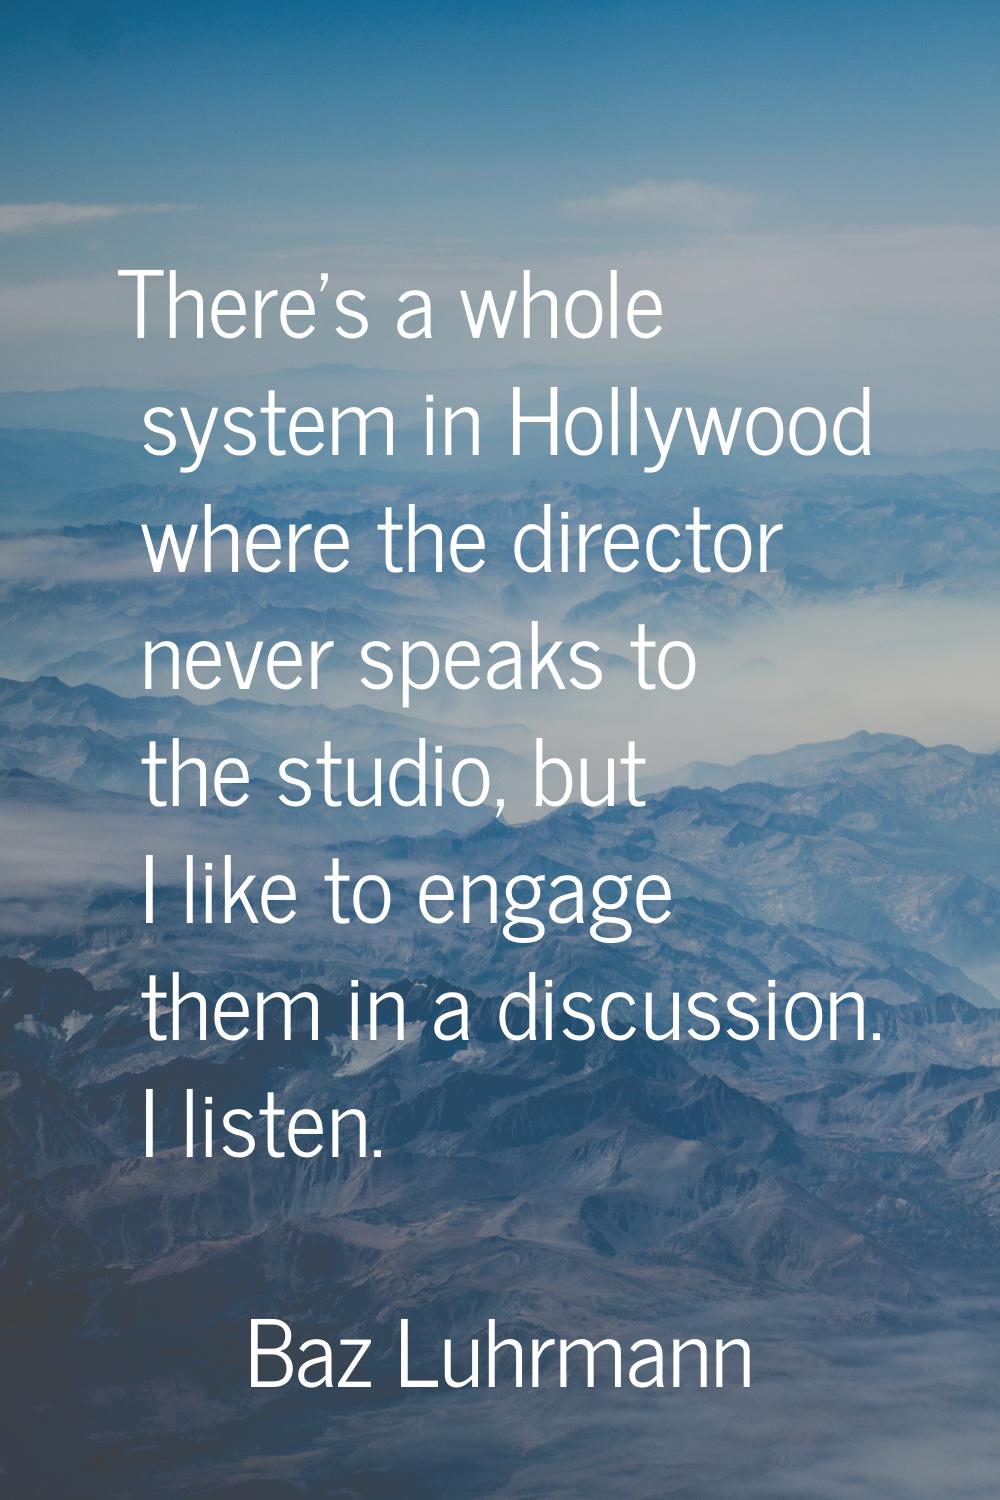 There's a whole system in Hollywood where the director never speaks to the studio, but I like to en